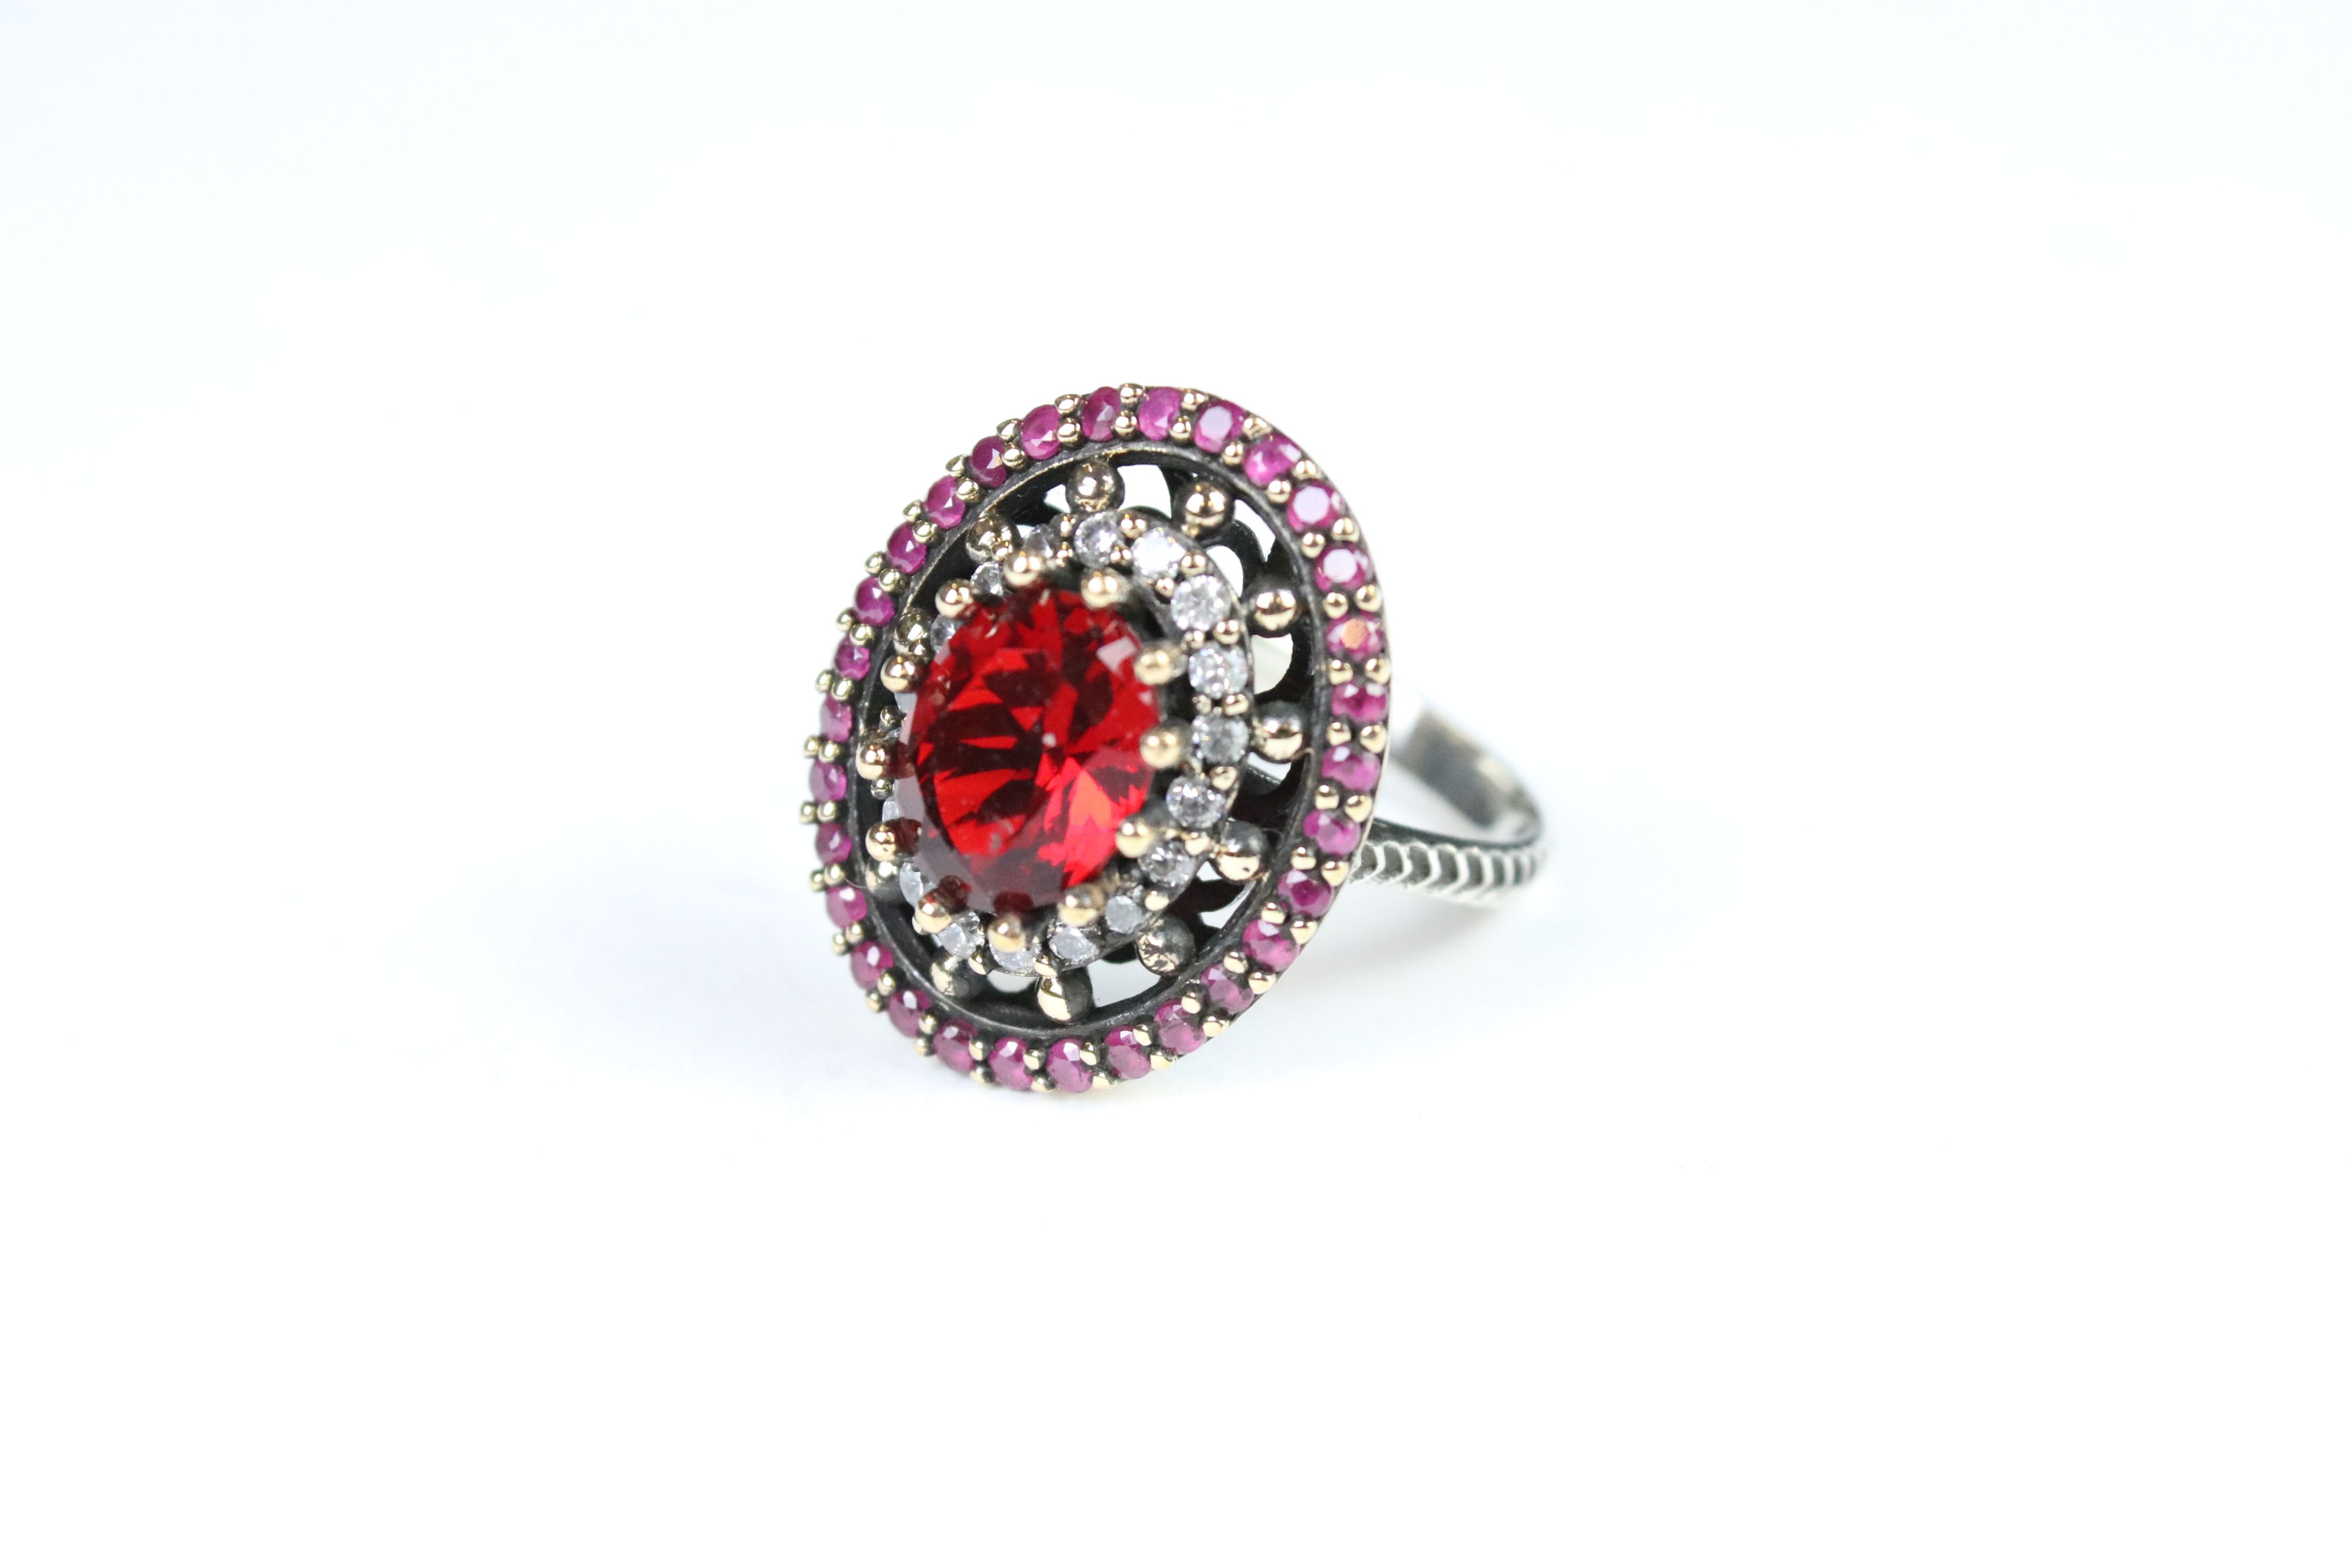 A large silver CZ and garnet dress ring